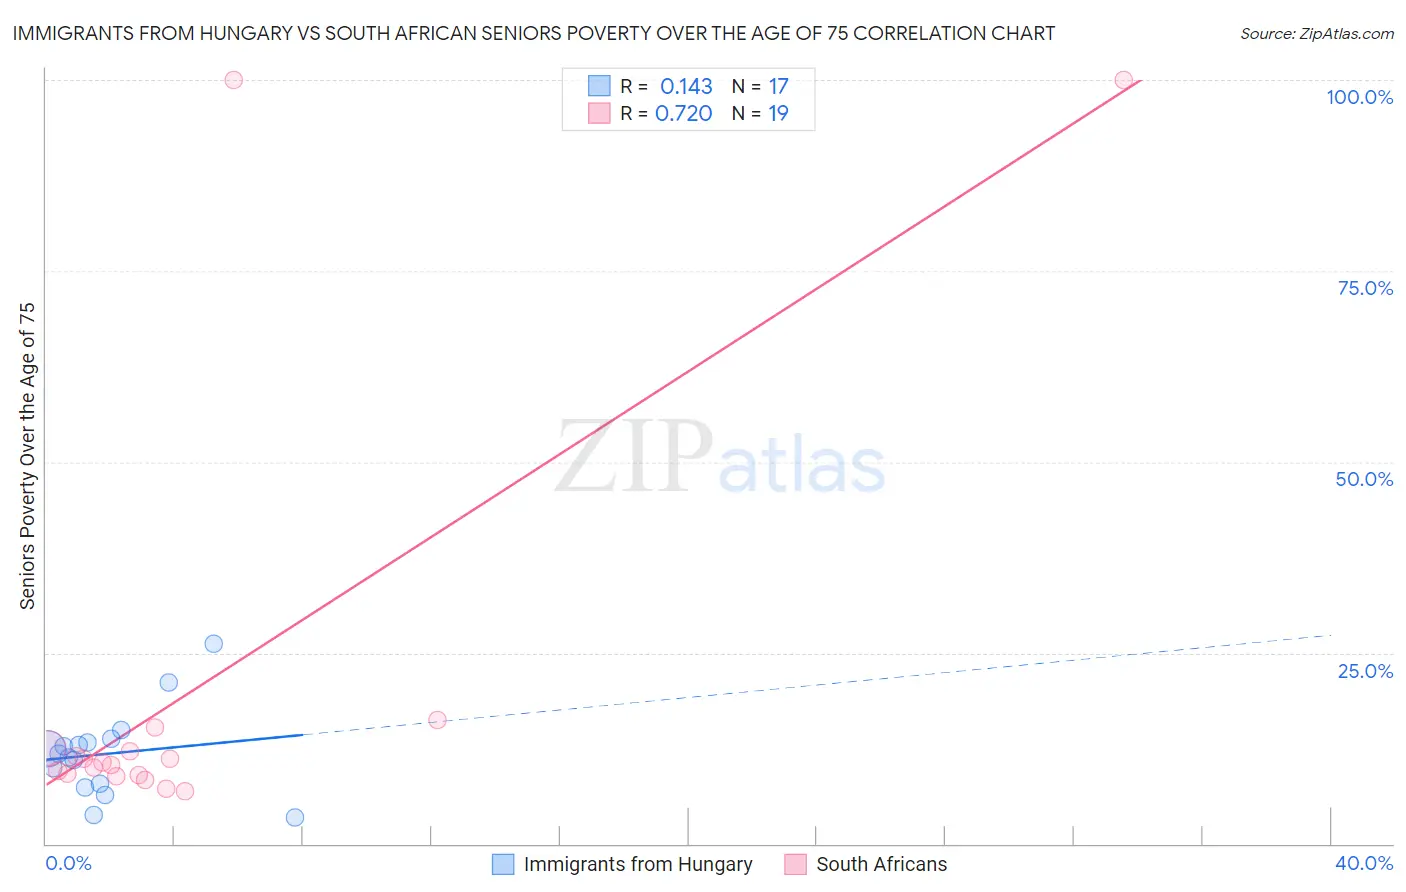 Immigrants from Hungary vs South African Seniors Poverty Over the Age of 75